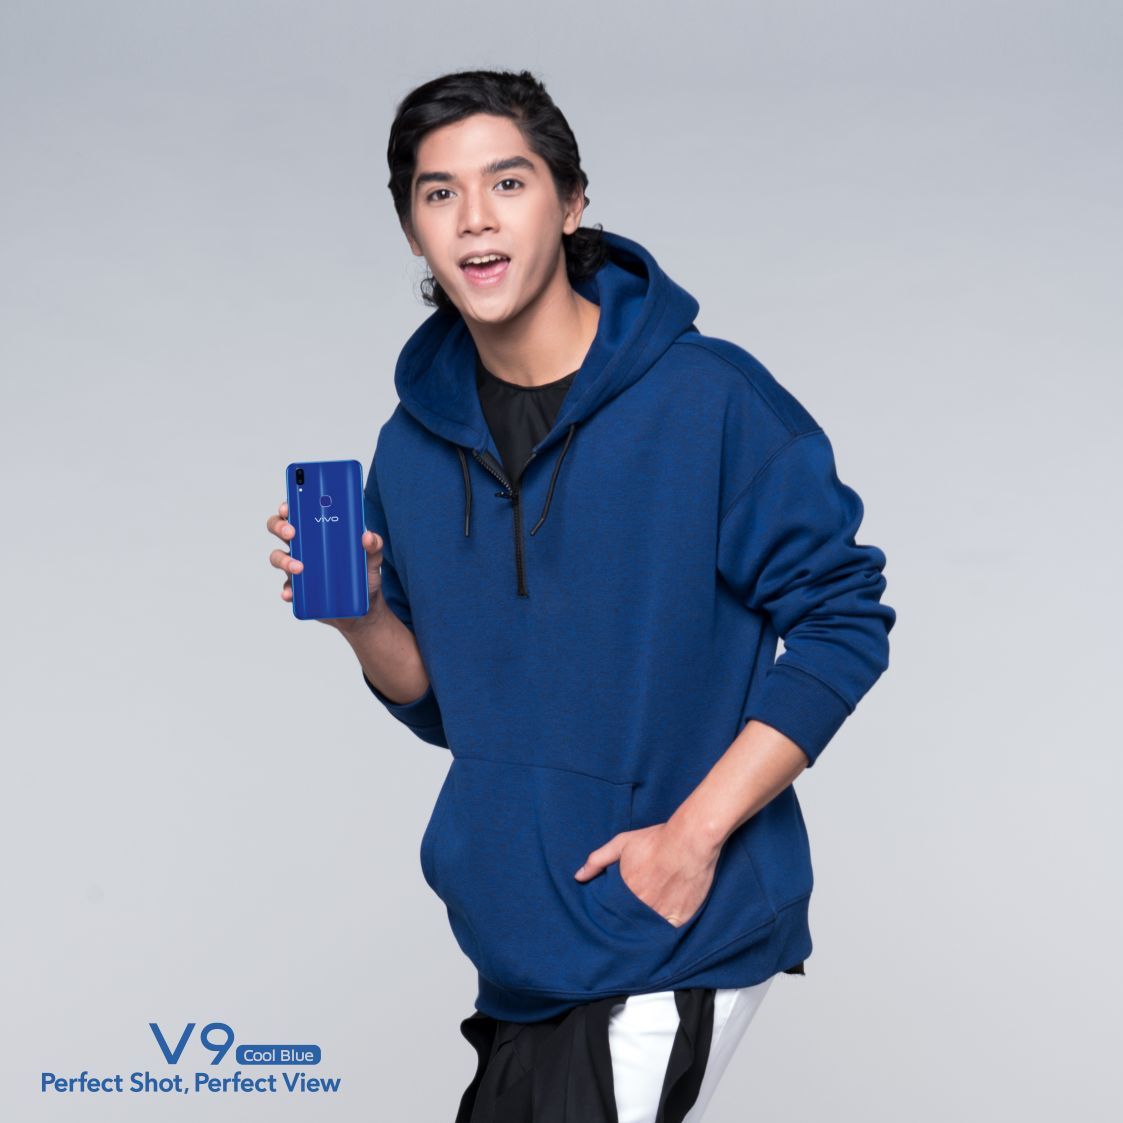 Be cool when using #VivoV9CoolBlue. Grab it fast at your favourite store right now! Because this item is Limited Edition. @vivo_indonesia